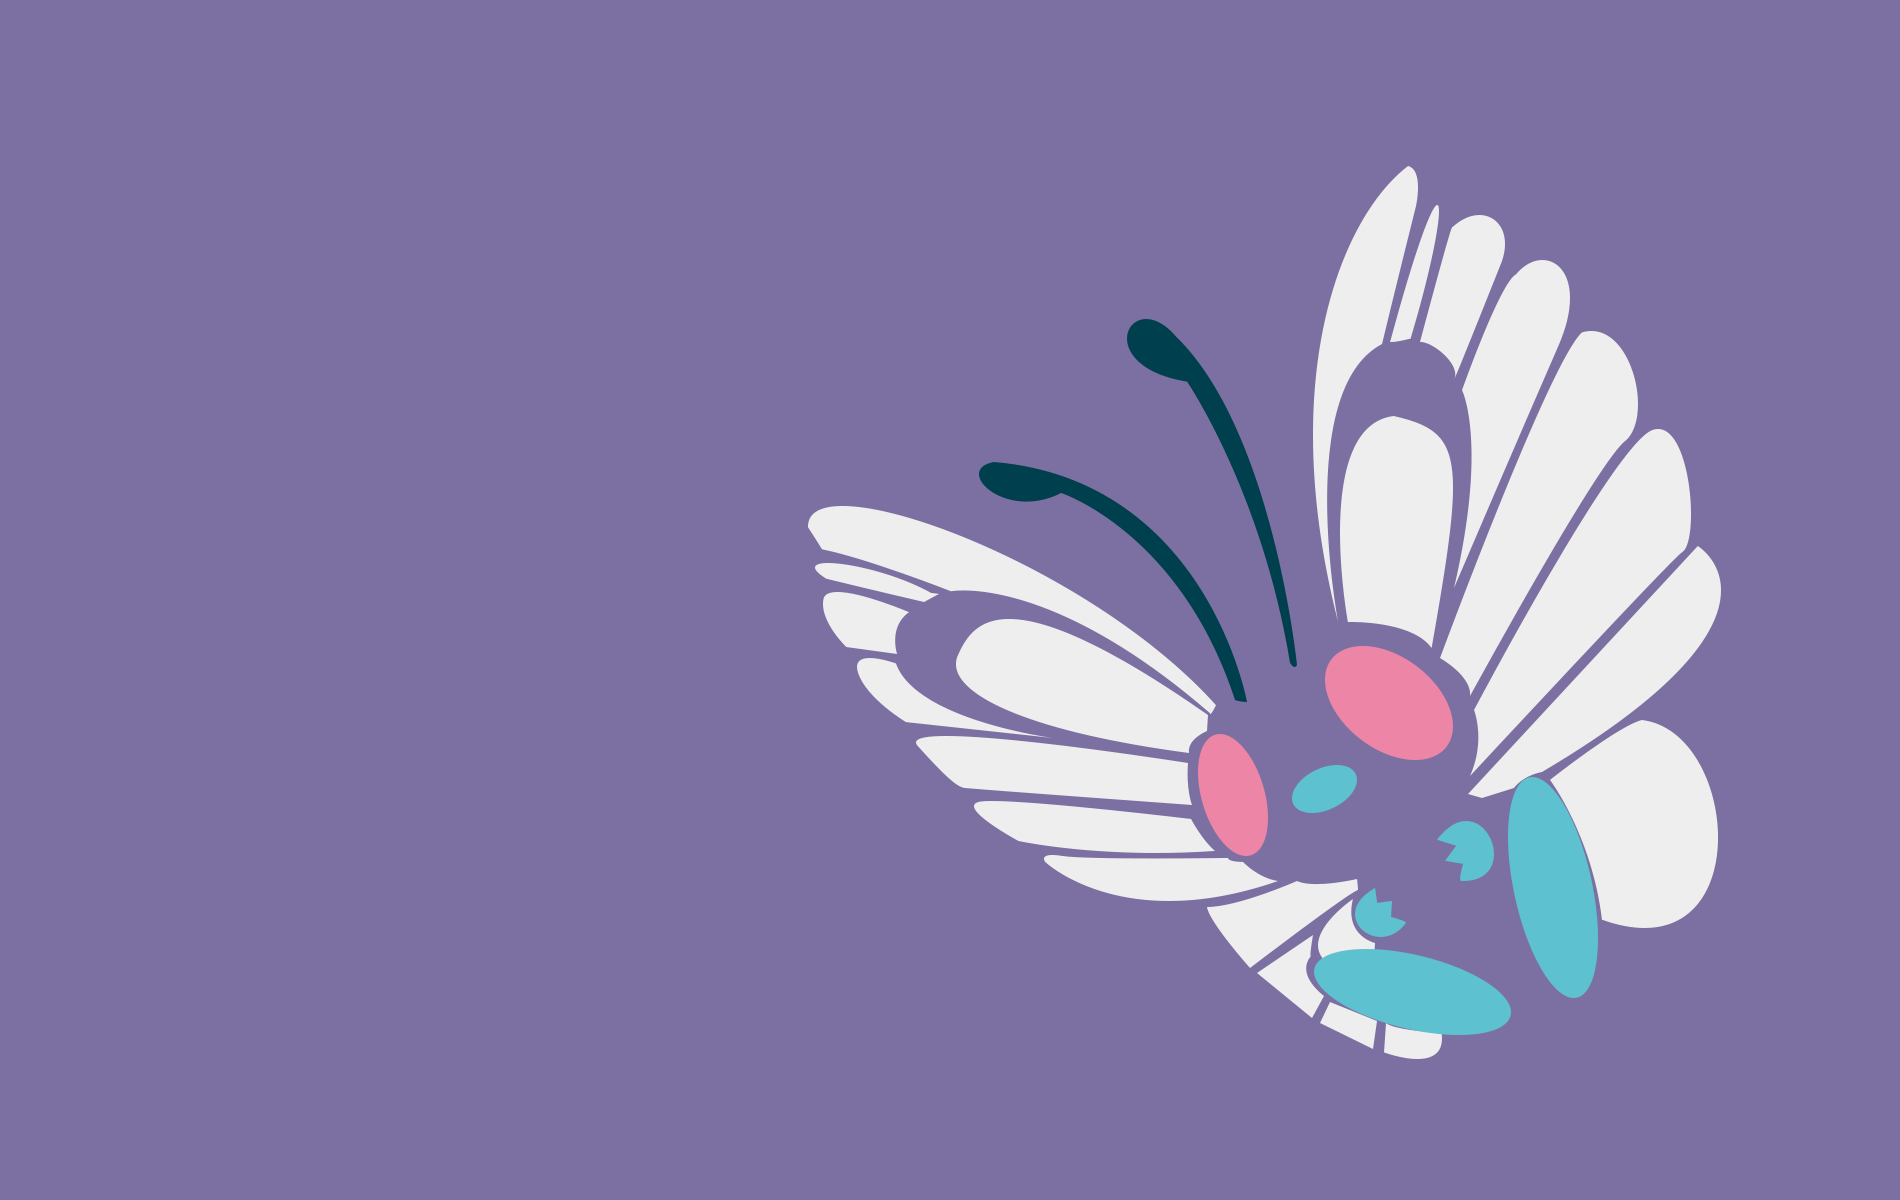 Butterfree Hd Wallpapers